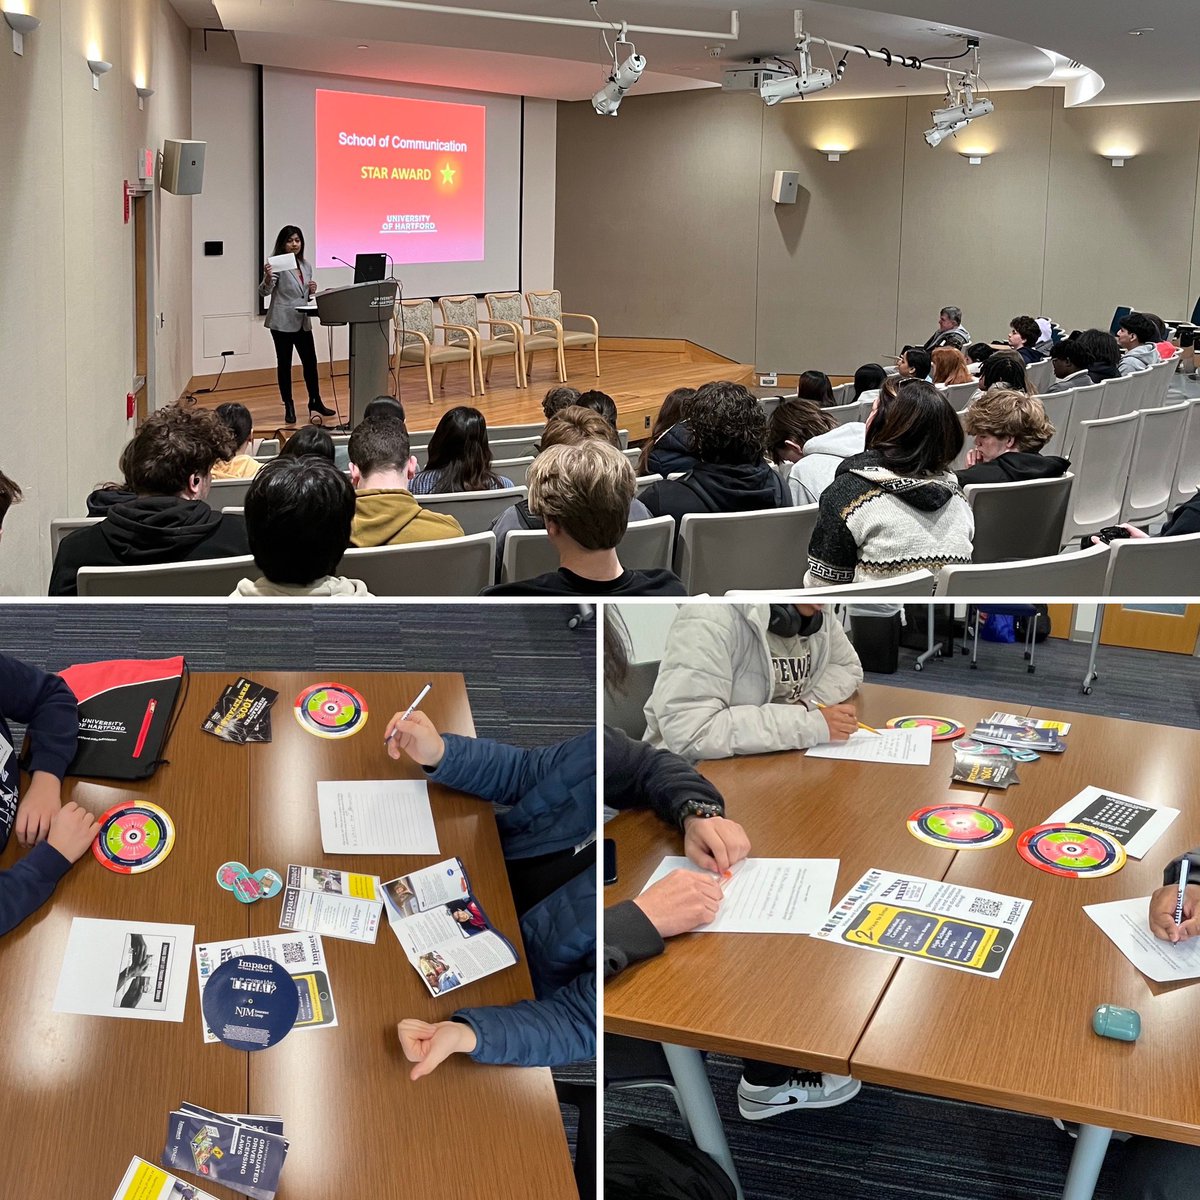 Thank you @UHartSoC for inviting us to participate in Media Day! Mackenzie & Professor Sarah Miner ran 6 PSA workshops with a focus on distracted driving to high school students from across Connecticut. Shout out to @NJMIns for their support in Connecticut. #SundayShoutOut